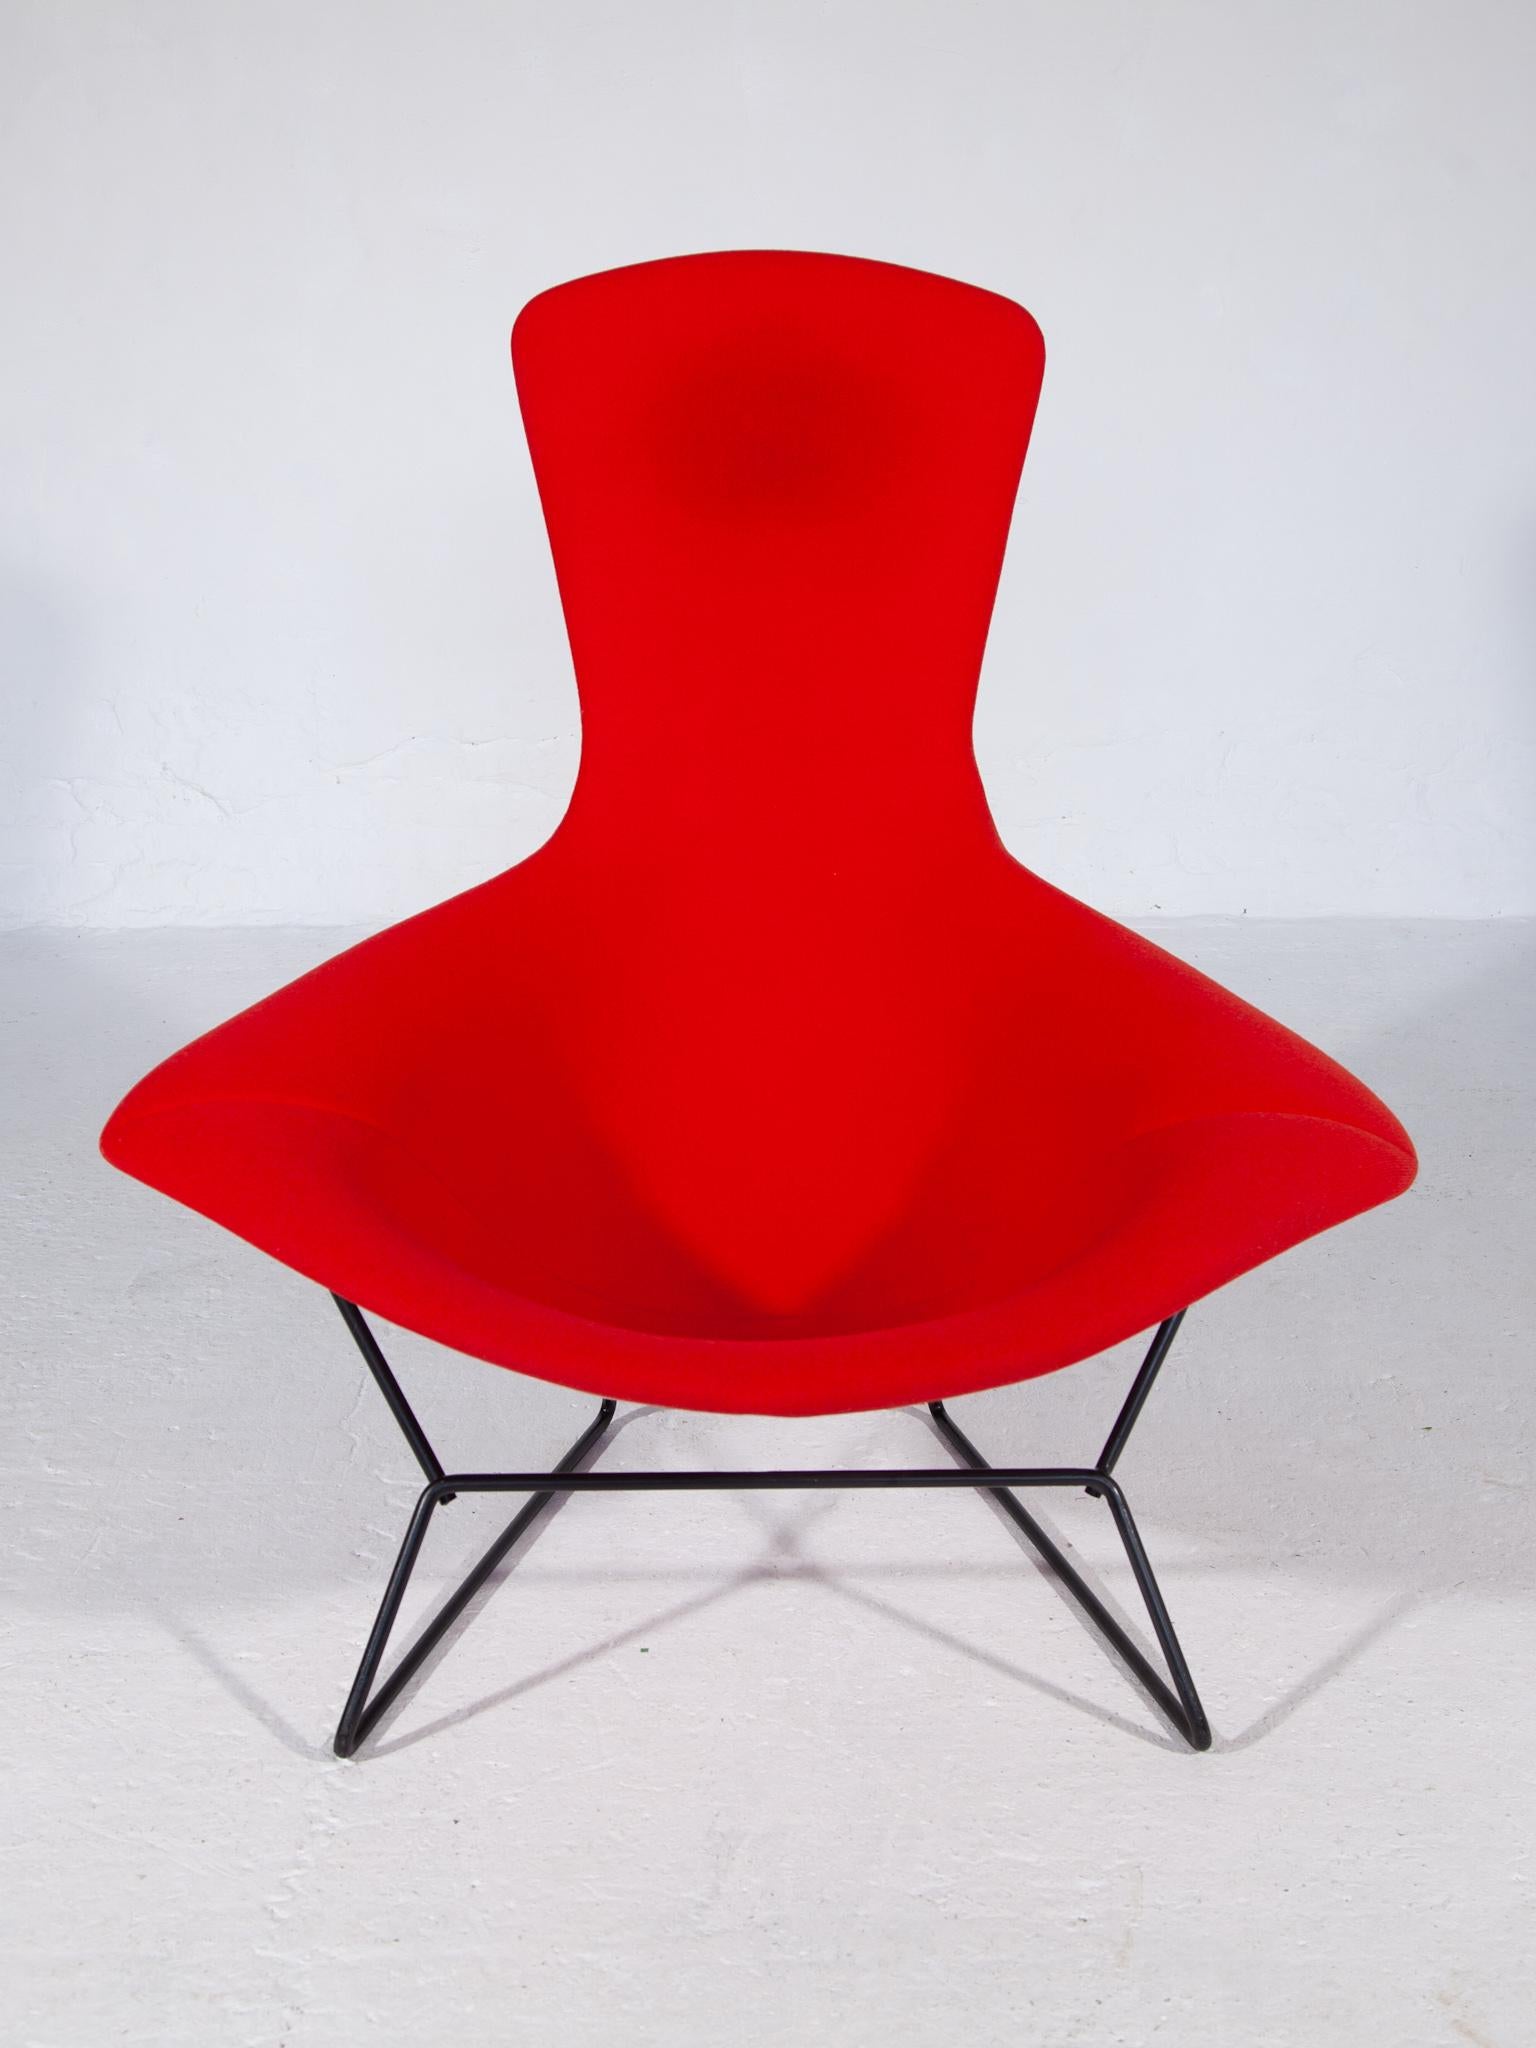 Original Vintage Harry Bertoia Bird chair for Knoll 1960s with an original Knoll fabric flame red slip cover on a metal white and black coated frame.The High Wingback chair is in original good condition with some signs of use. 
Les chaises Bertoia